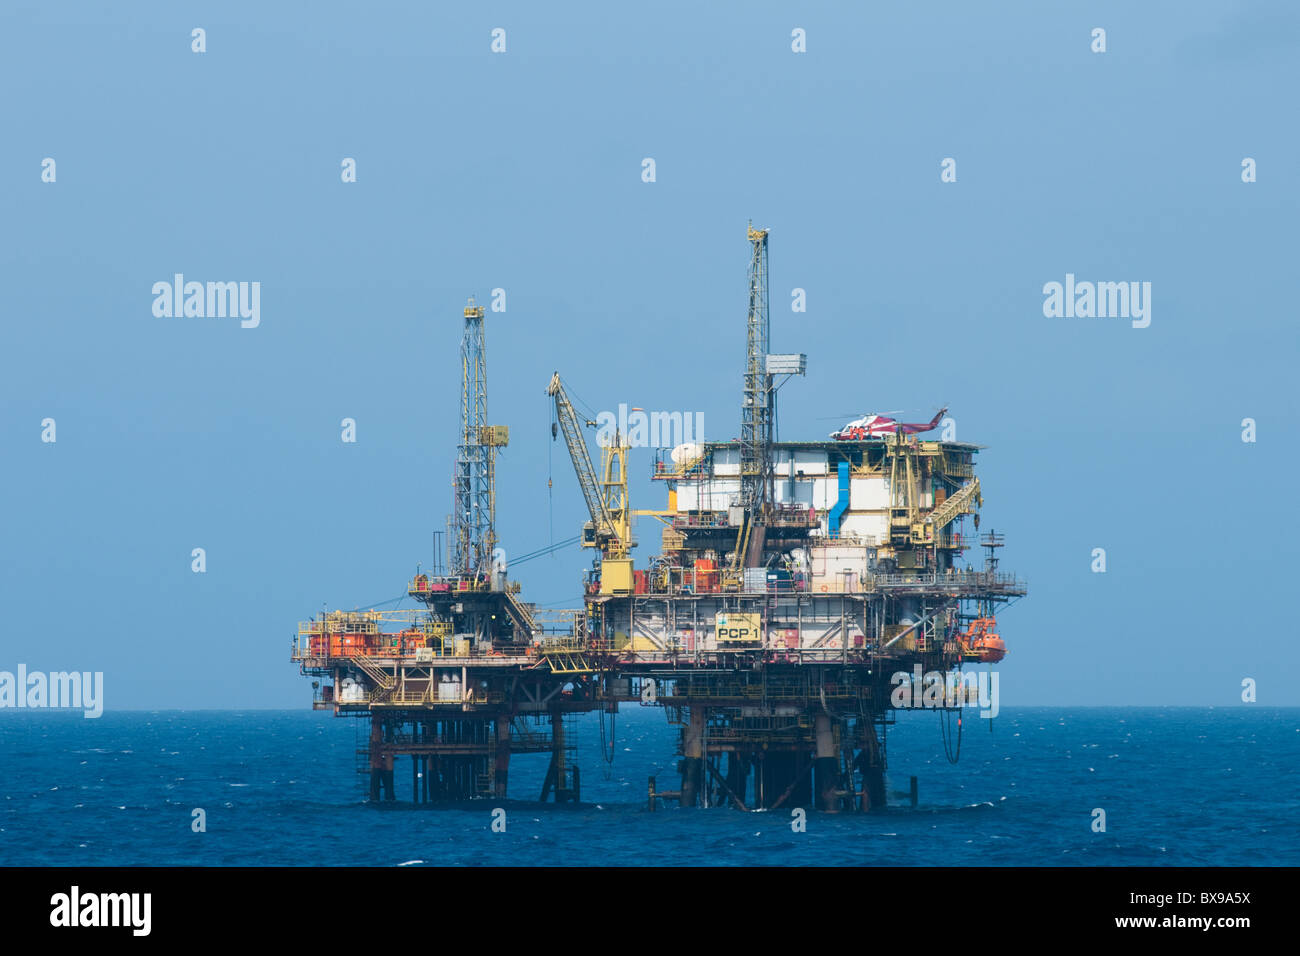 PCP-1 oil rig from Petrobras brazilian oil company. Helicopter landed on helipad. Stock Photo